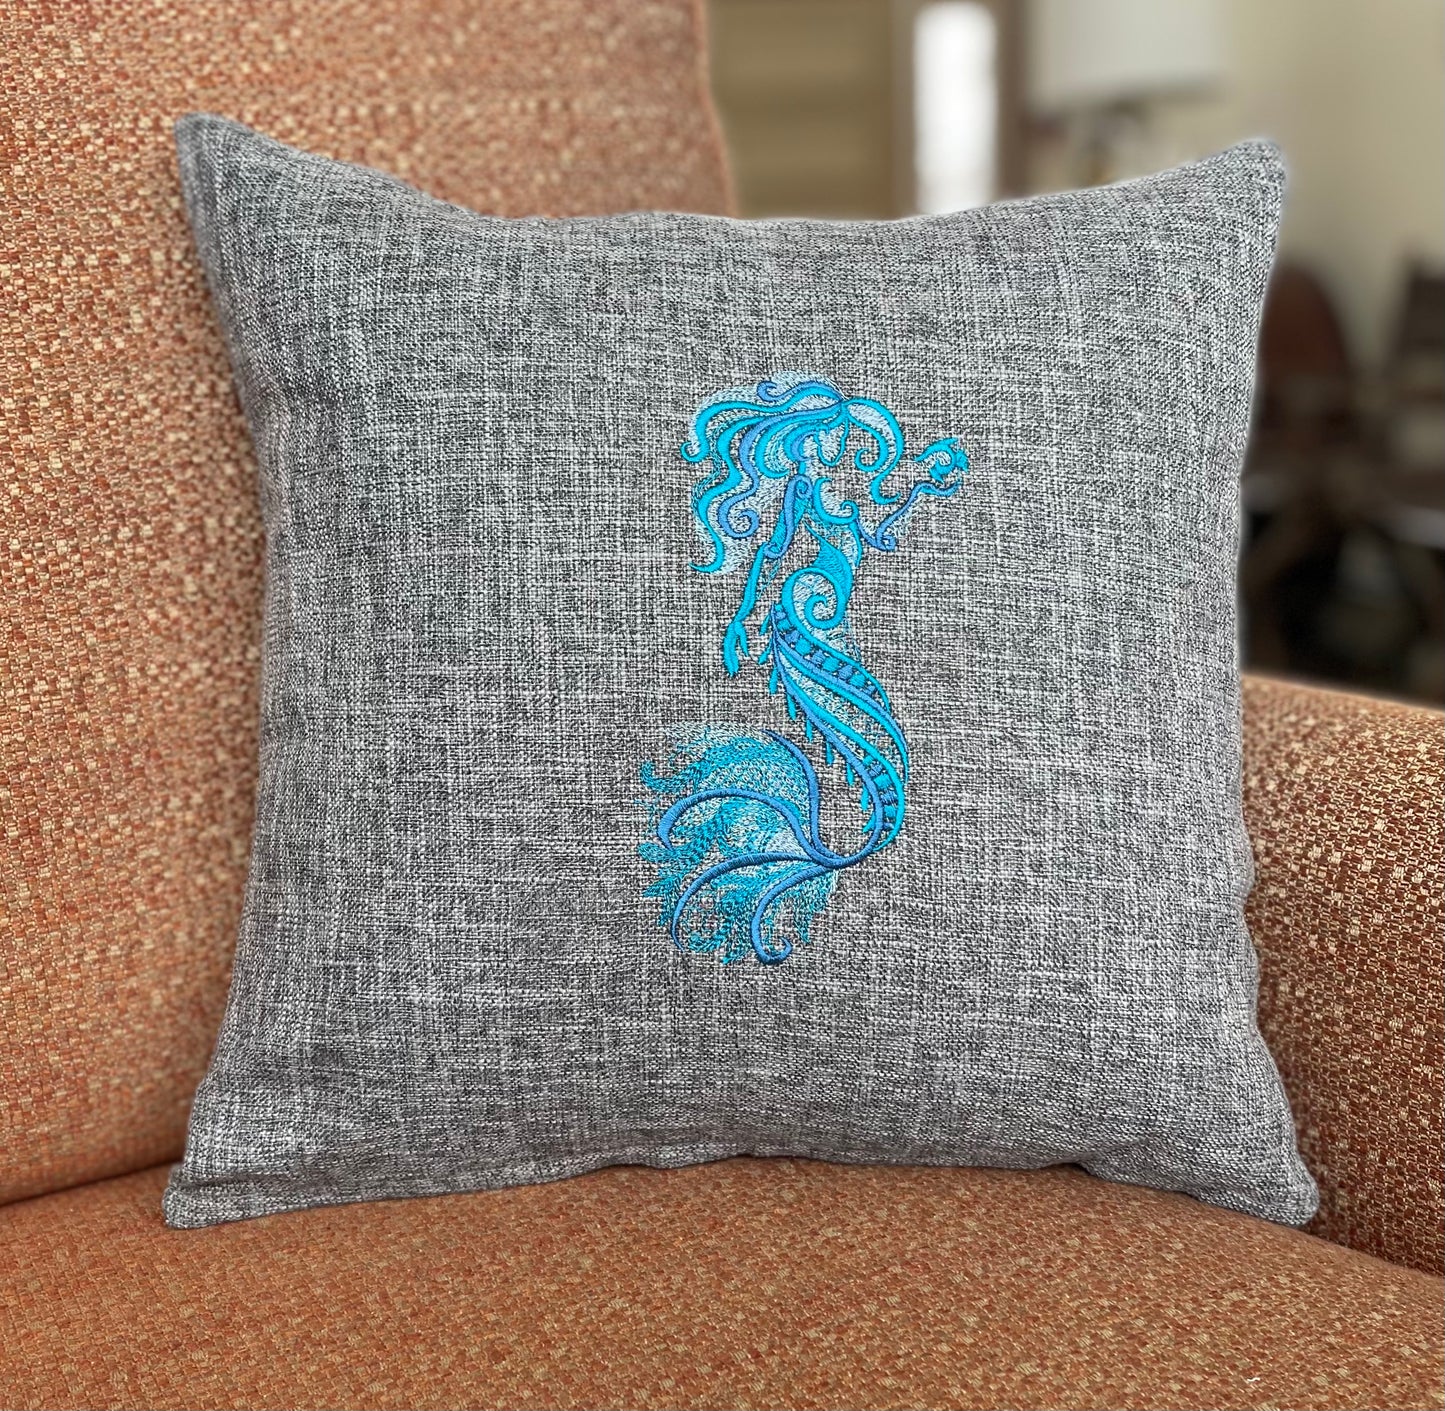 Lace Mermaid Throw Pillow Cover 16” x 16” Cotton Cover Zip Closure